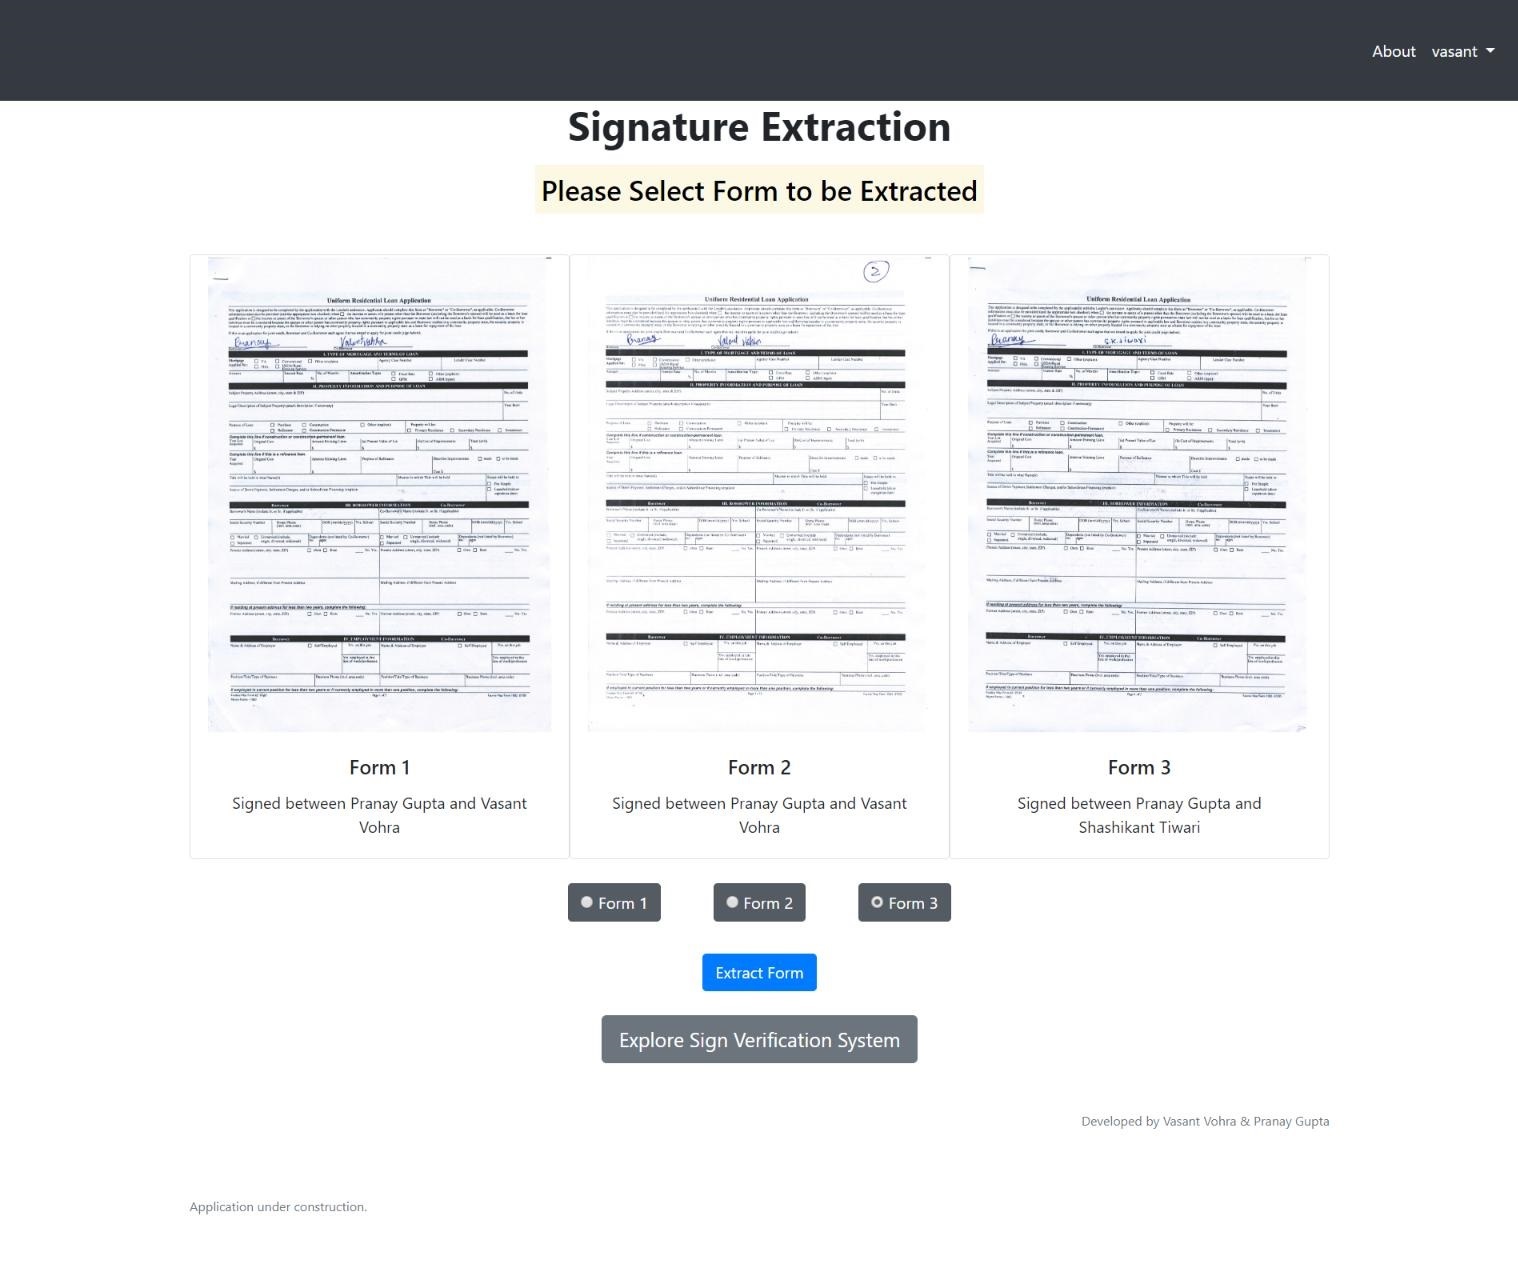 Signature Extraction